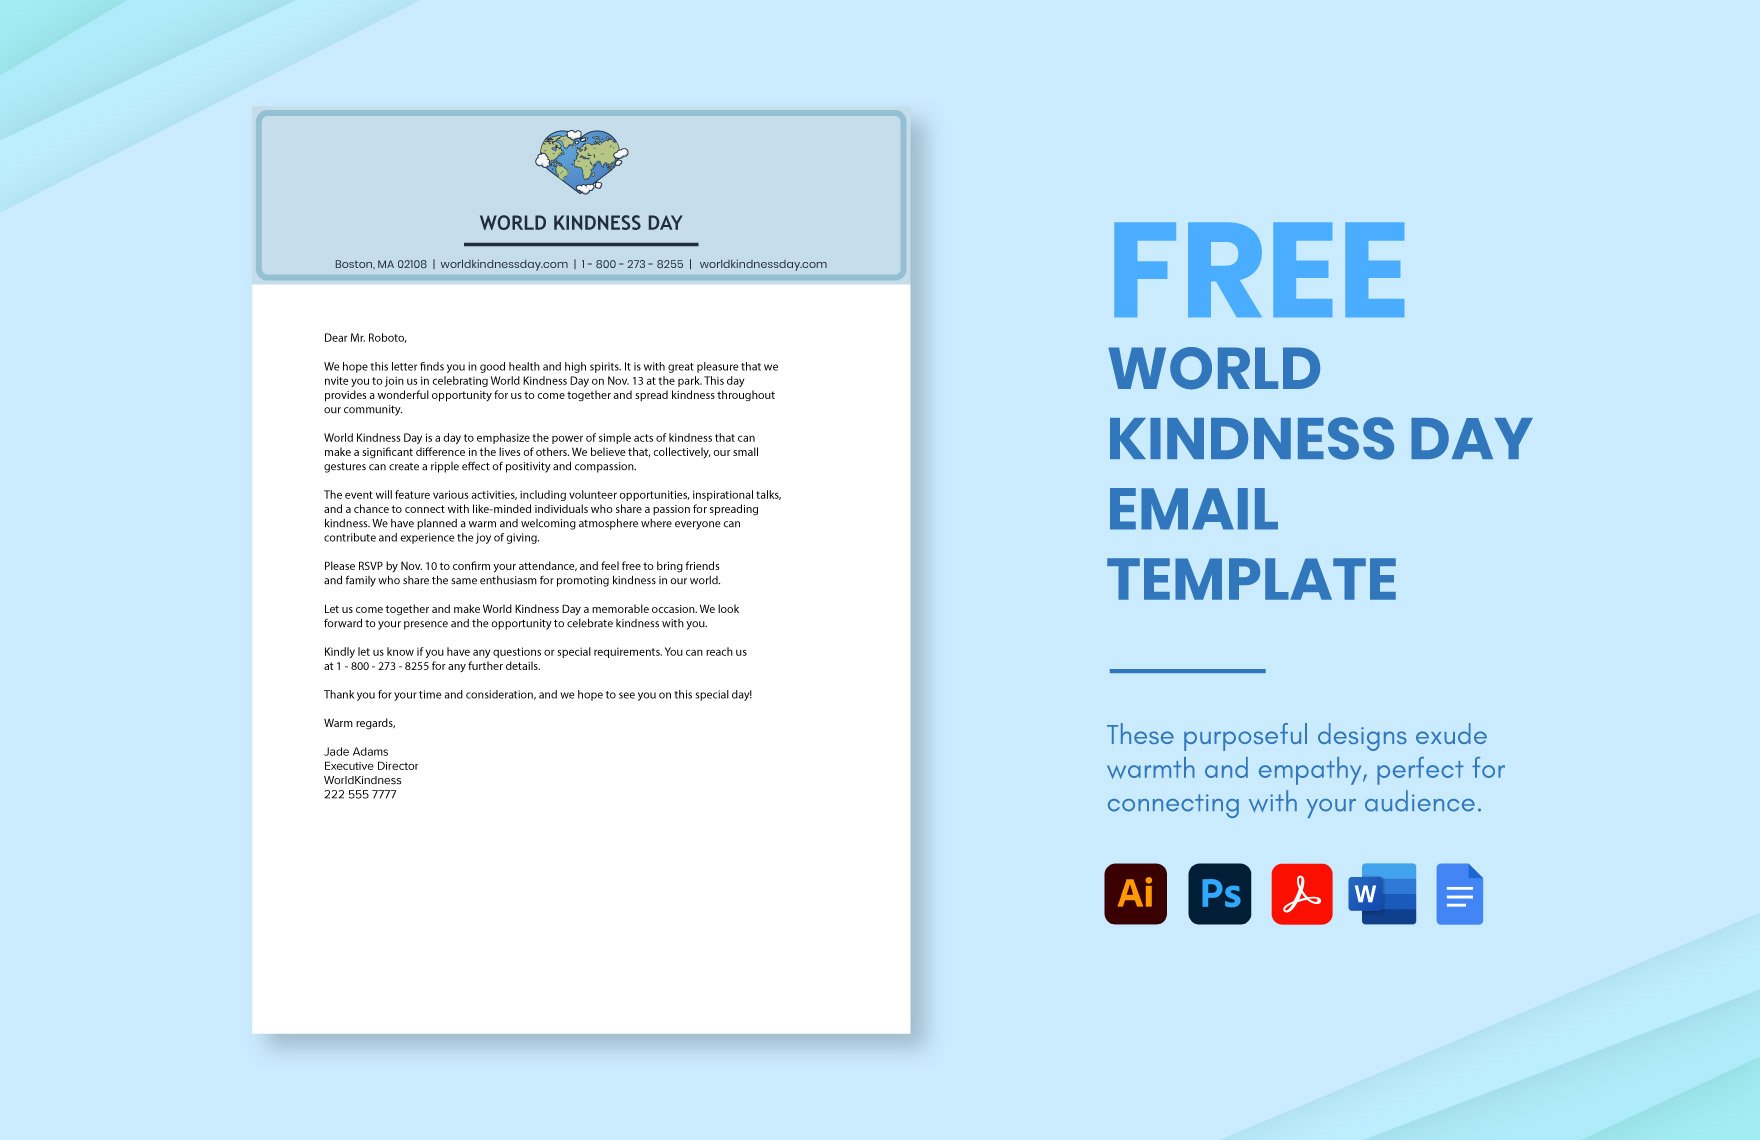 World Kindness Day Email Template